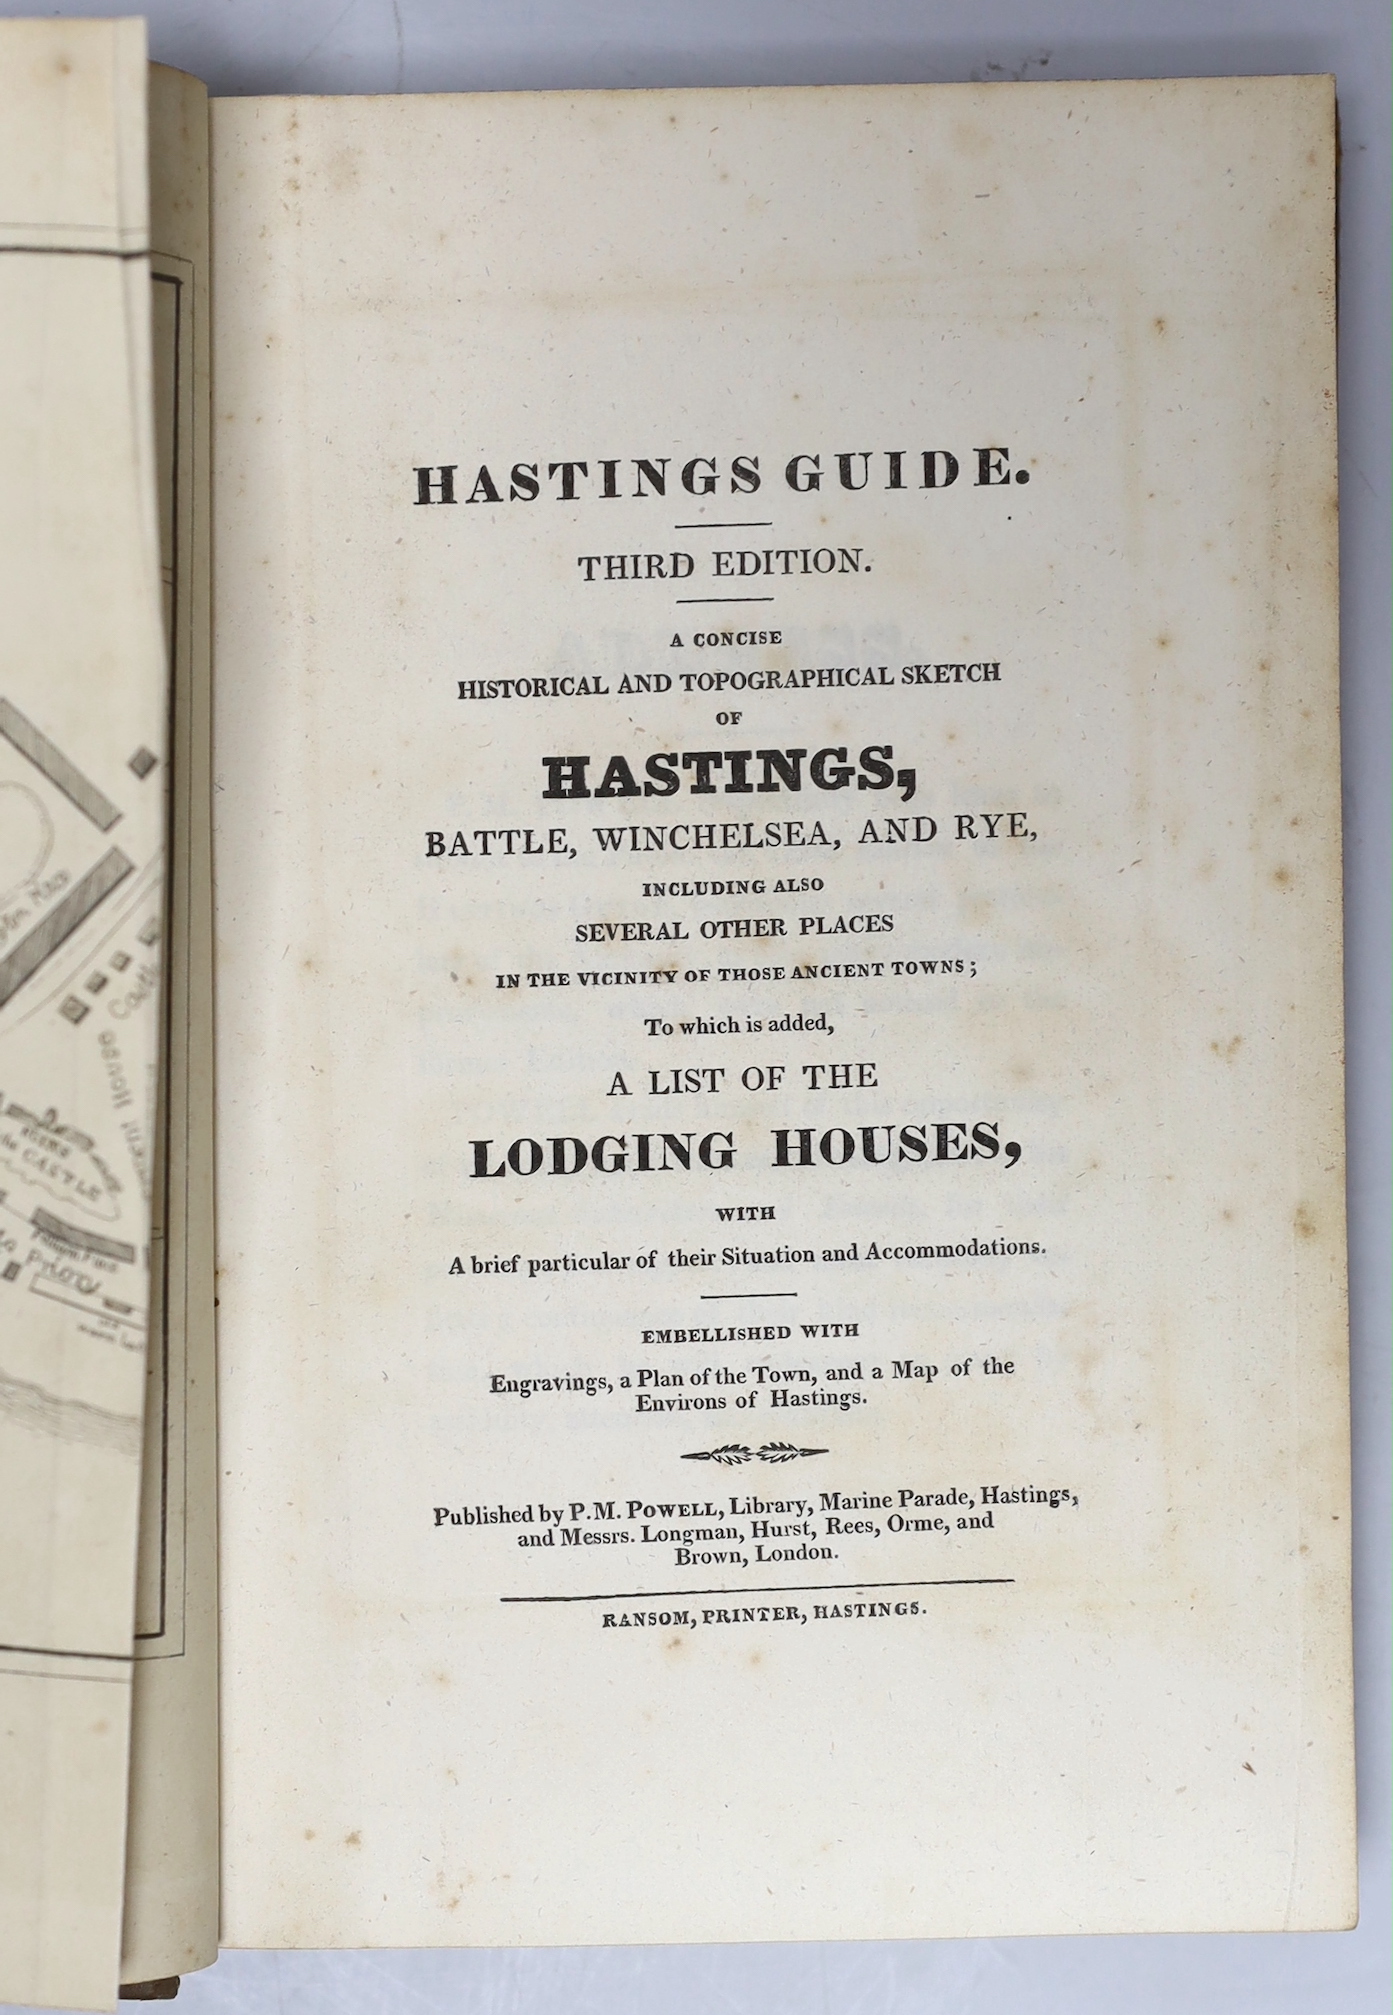 HASTINGS - Powell, P.M - Hastings Guide, 3rd edition, 8vo, half calf, with folding town plan and 30 plates, circa 1823, bound with the 5th edition, with folding town plan and 20 plates, circa 1830; [Howard, Mary Matilda]